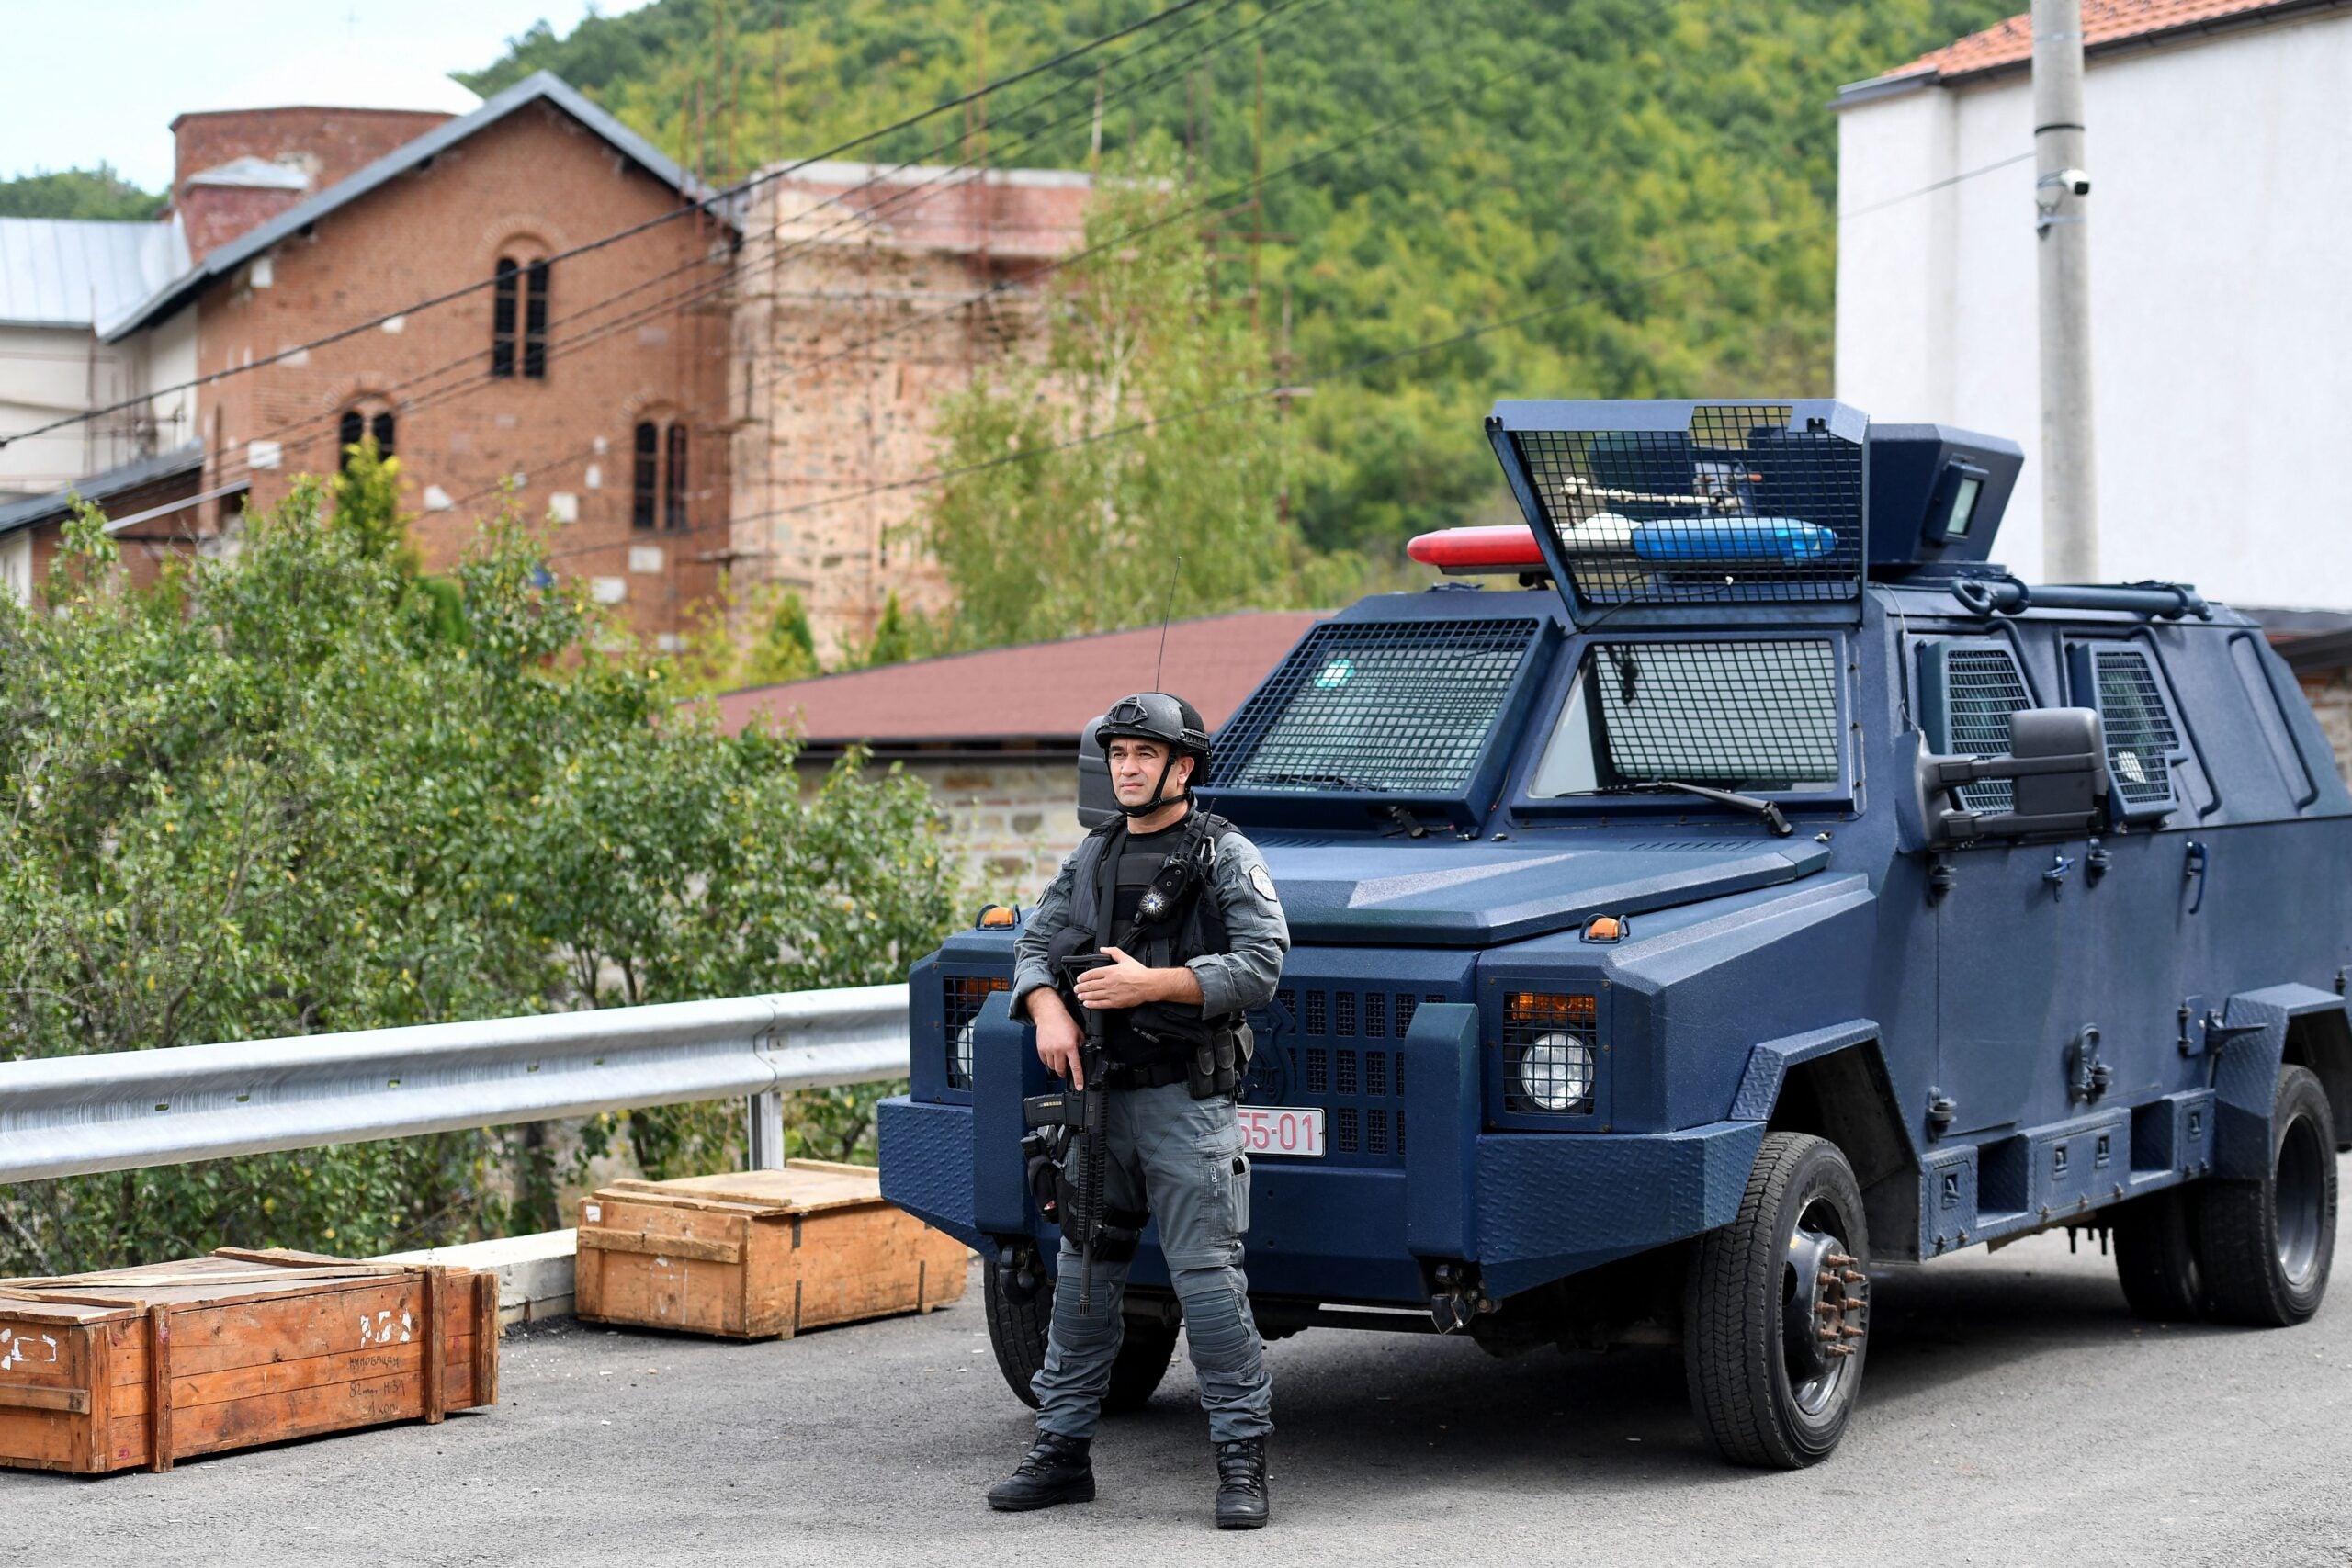 A member of a Kosovo police special unit stands guard in an area around the Banjska Monastery in Banjska, north Kosovo, some 15km from the border with Serbia, on September 27, 2023. A Kosovo court on September 26 remanded two suspected gunmen into custody after they were arrested at the weekend during a firefight and standoff with police near the border with Serbia. The court's decision came days after the killing of a police officer during an ambush and an ensuing gunbattle at a monastery in the village of Banjska, marking one of the gravest escalations in Kosovo for years. (Photo by STRINGER / AFP) (Photo by STRINGER/AFP via Getty Images)